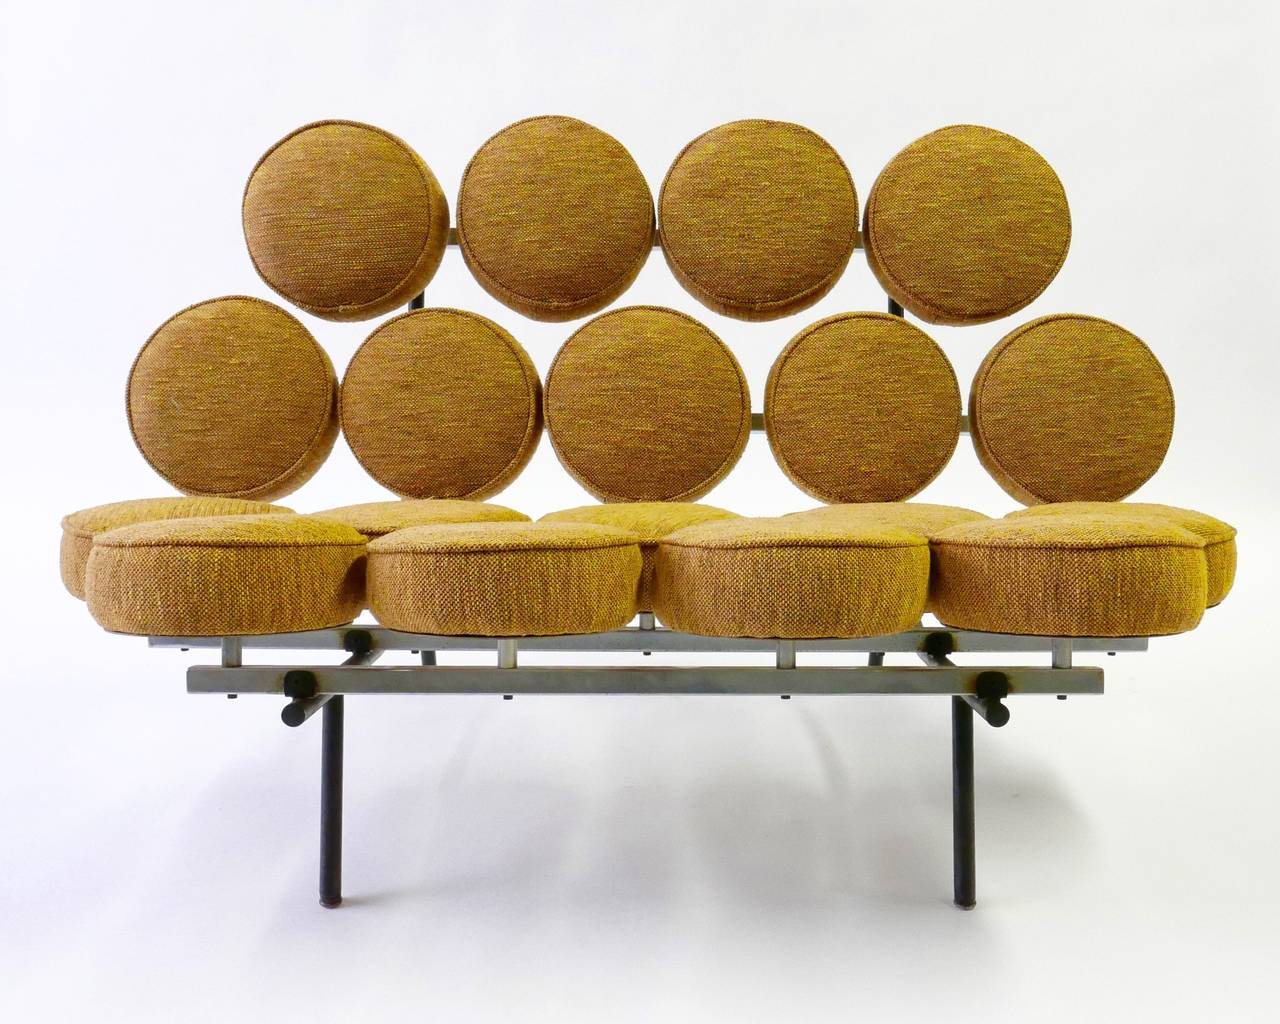 This is a fine example of an iconic 20th century design.
Created by George Nelson for Herman Miller in 1956.
This original marshmallow sofa has butterscotch wool fabric over chrom-plated and enameled steel. The manufactures label is present to